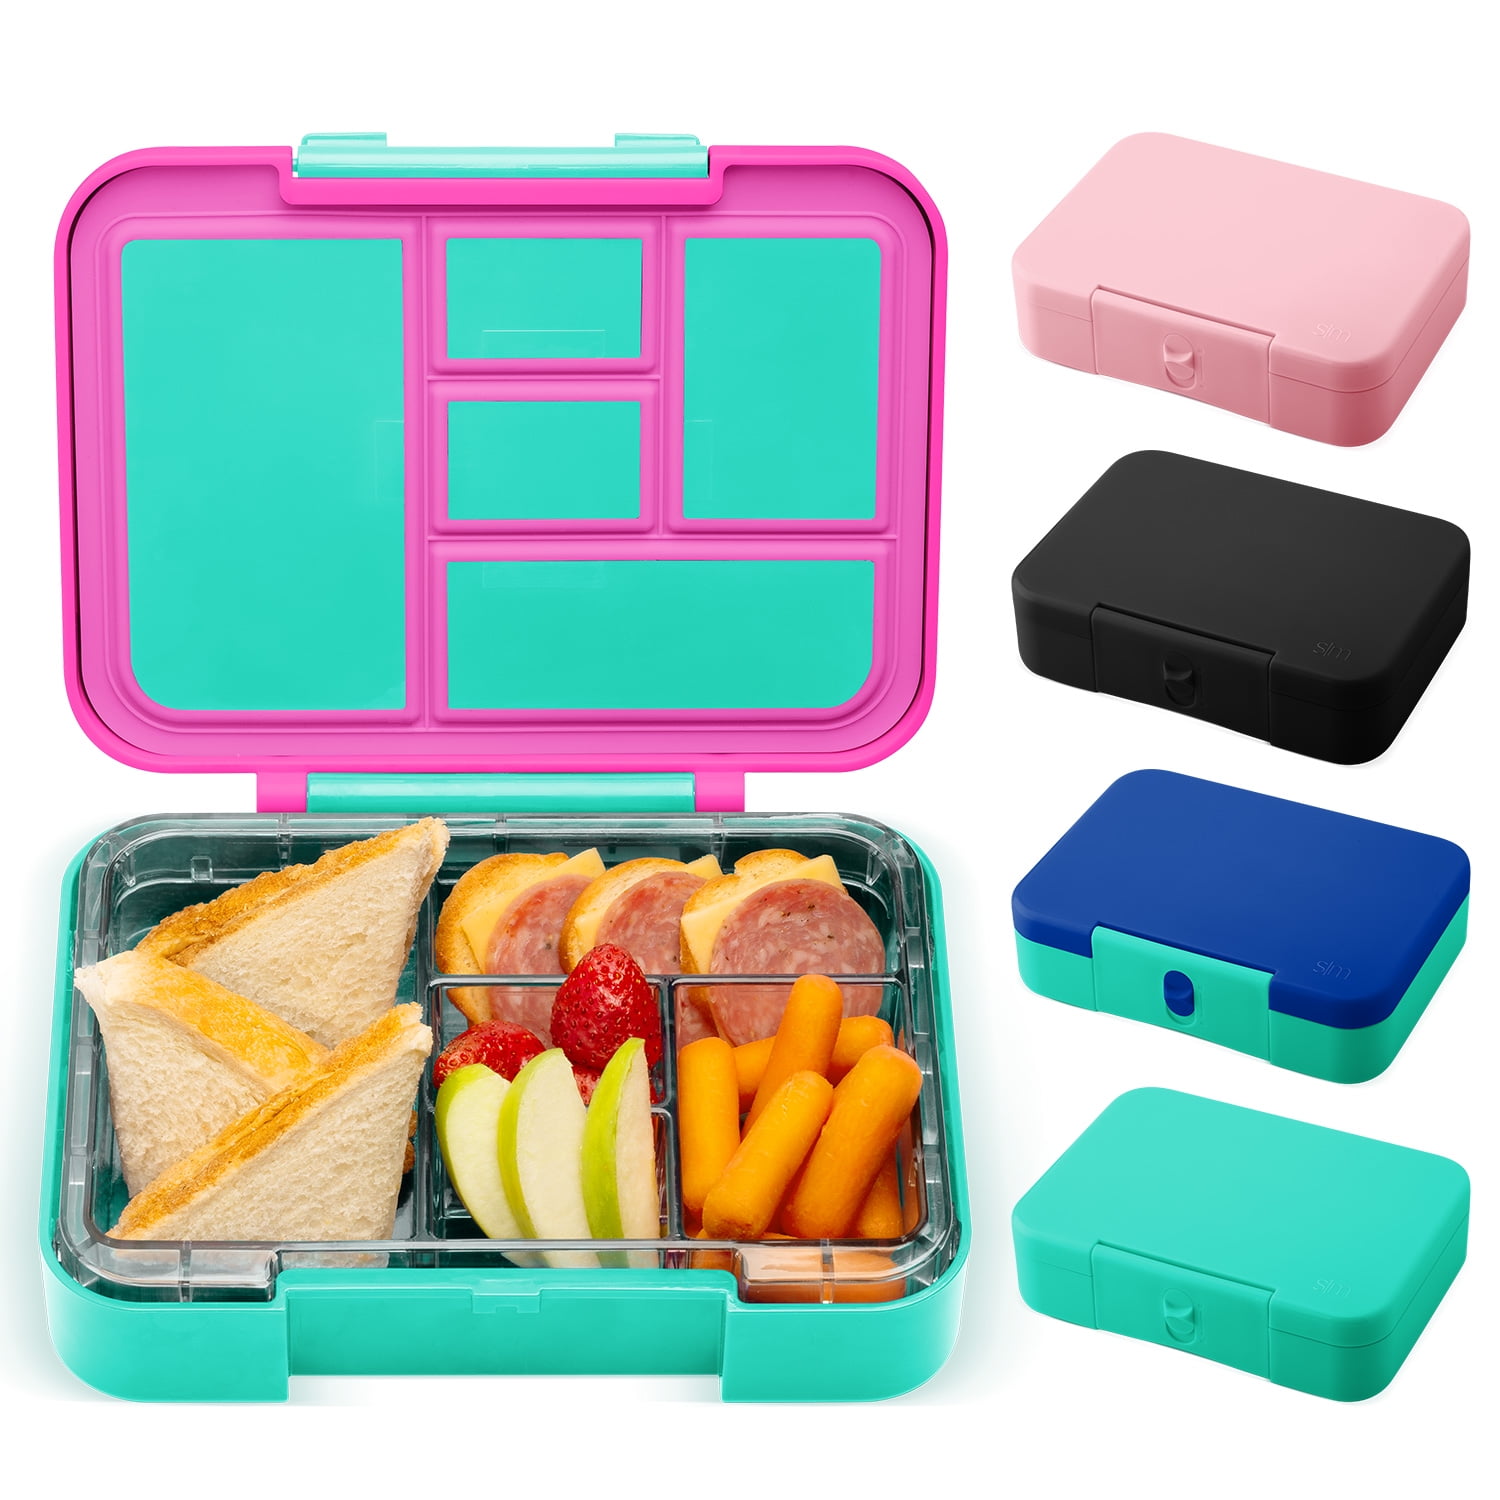 simple-modern-porter-bento-lunch-box-for-kids-leakproof-divided-container-with-5-compartments